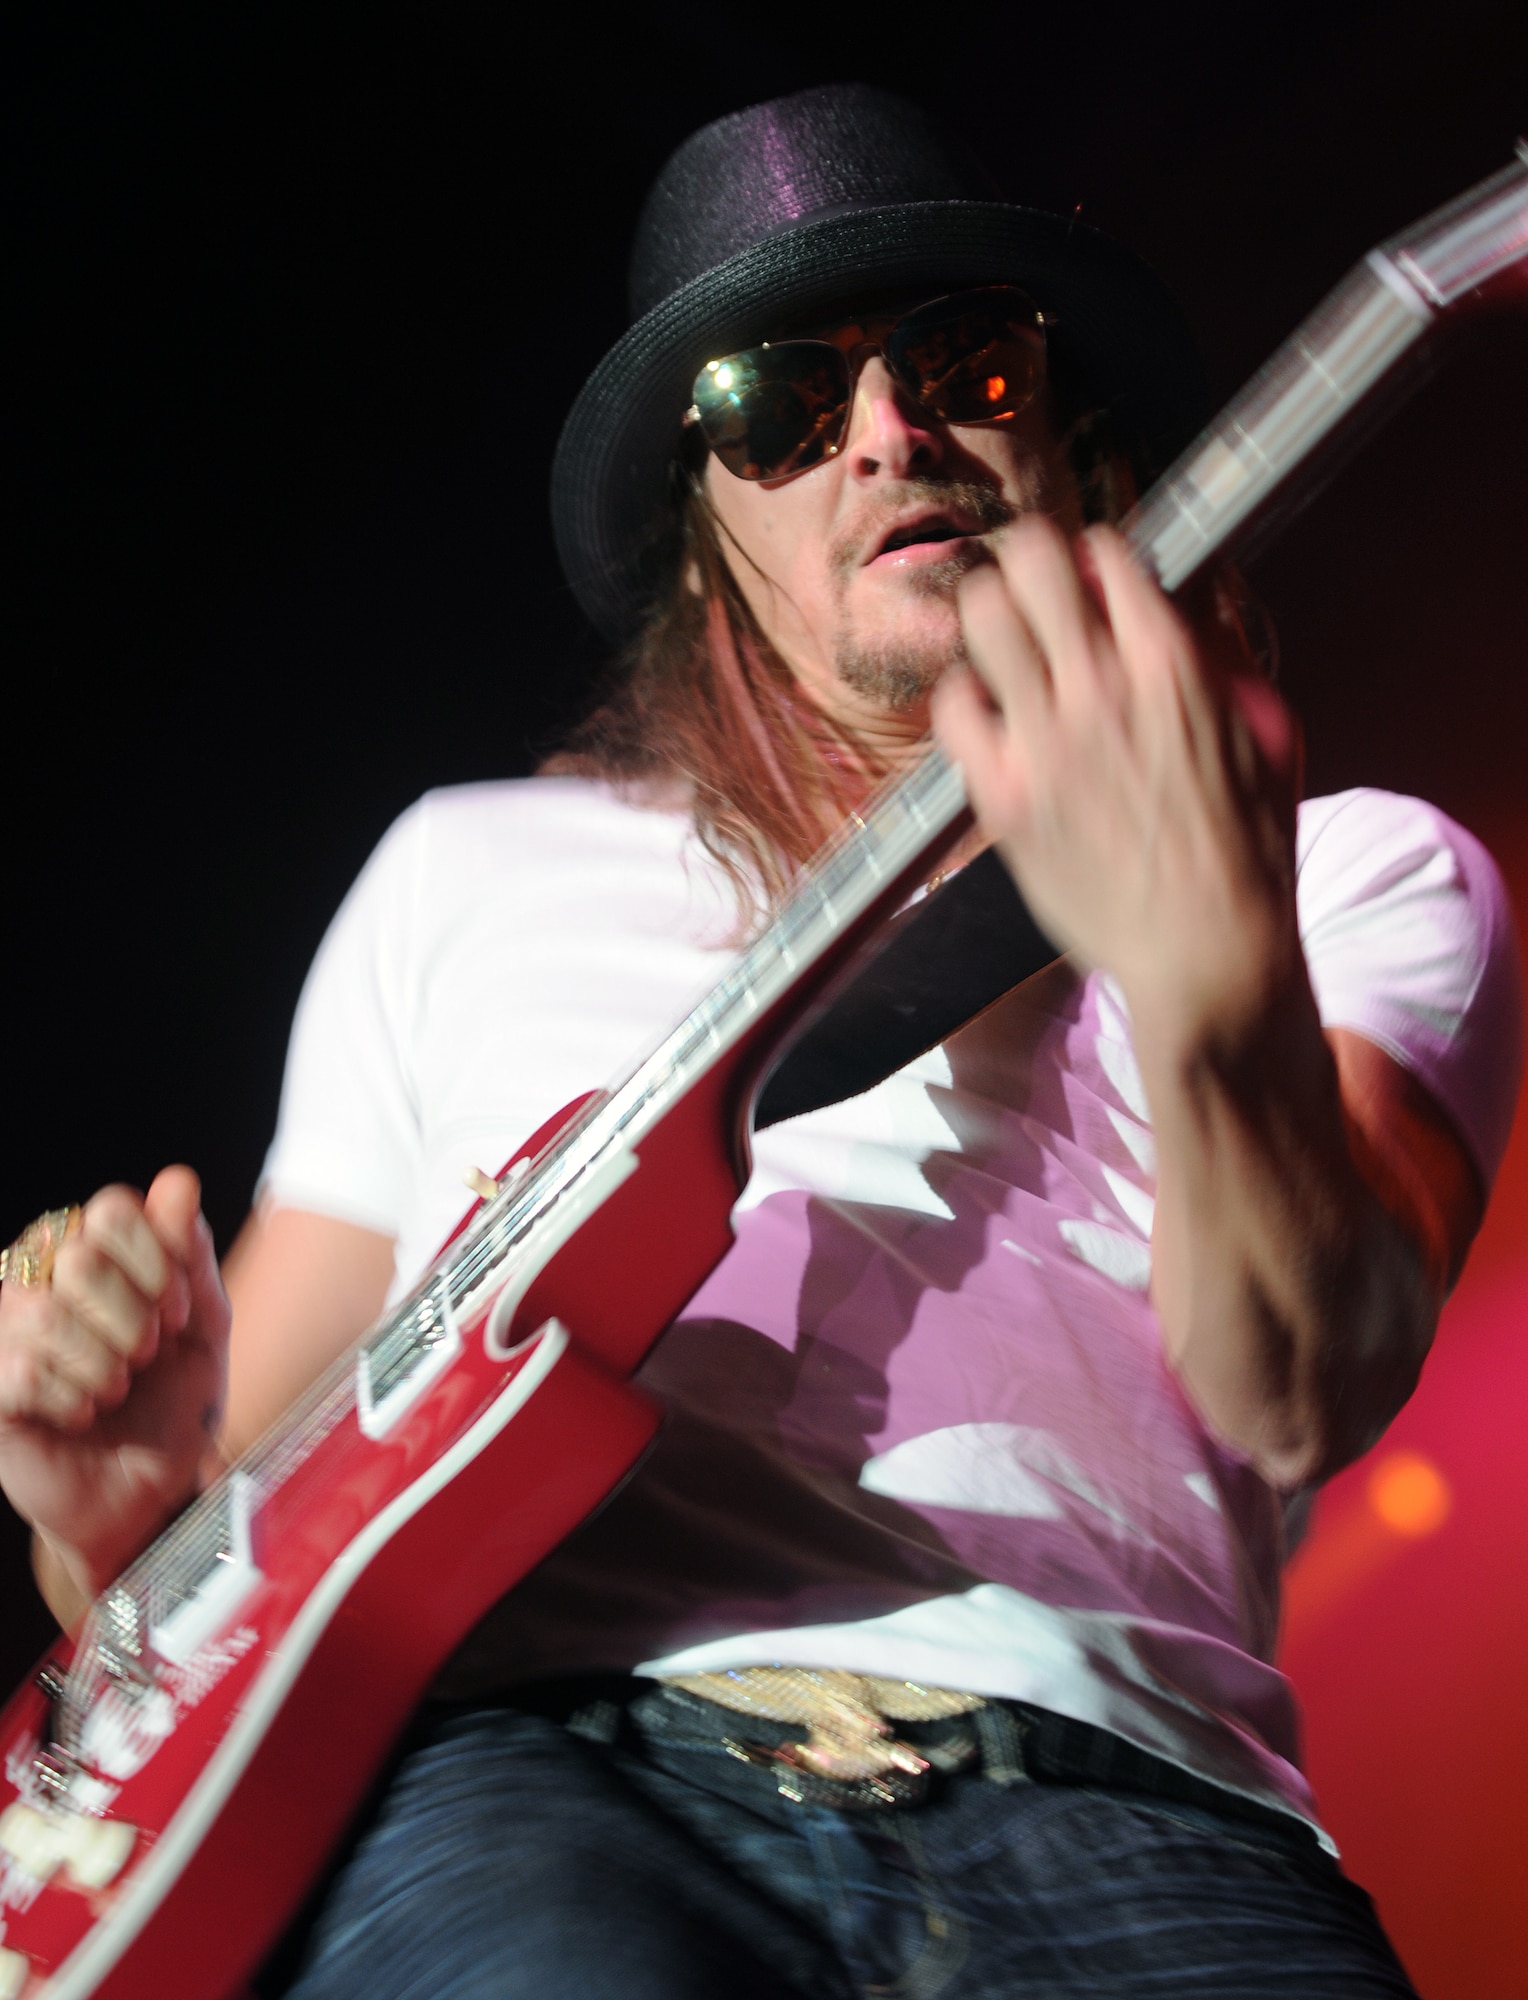 Kid Rock performs at the Tour for the Troops concert Tuesday Dec. 1, 2009, inside Hangar 4 at Incirlik Air Base, Turkey. Kid Rock and the Twisted Brown Truck Band, singer/songwriter Jessie James and comedian Carlos Mencia kicked off the tour making Incirlik their first stop to thank the troops. The three entertainers also visited various places around the base including the 39th Security Forces Squadron, Incirlik’s American Forces Network studio and the 39th Force Support Squadron. (U.S. Air Force photo by/ Senior Airman Sara Csurilla)